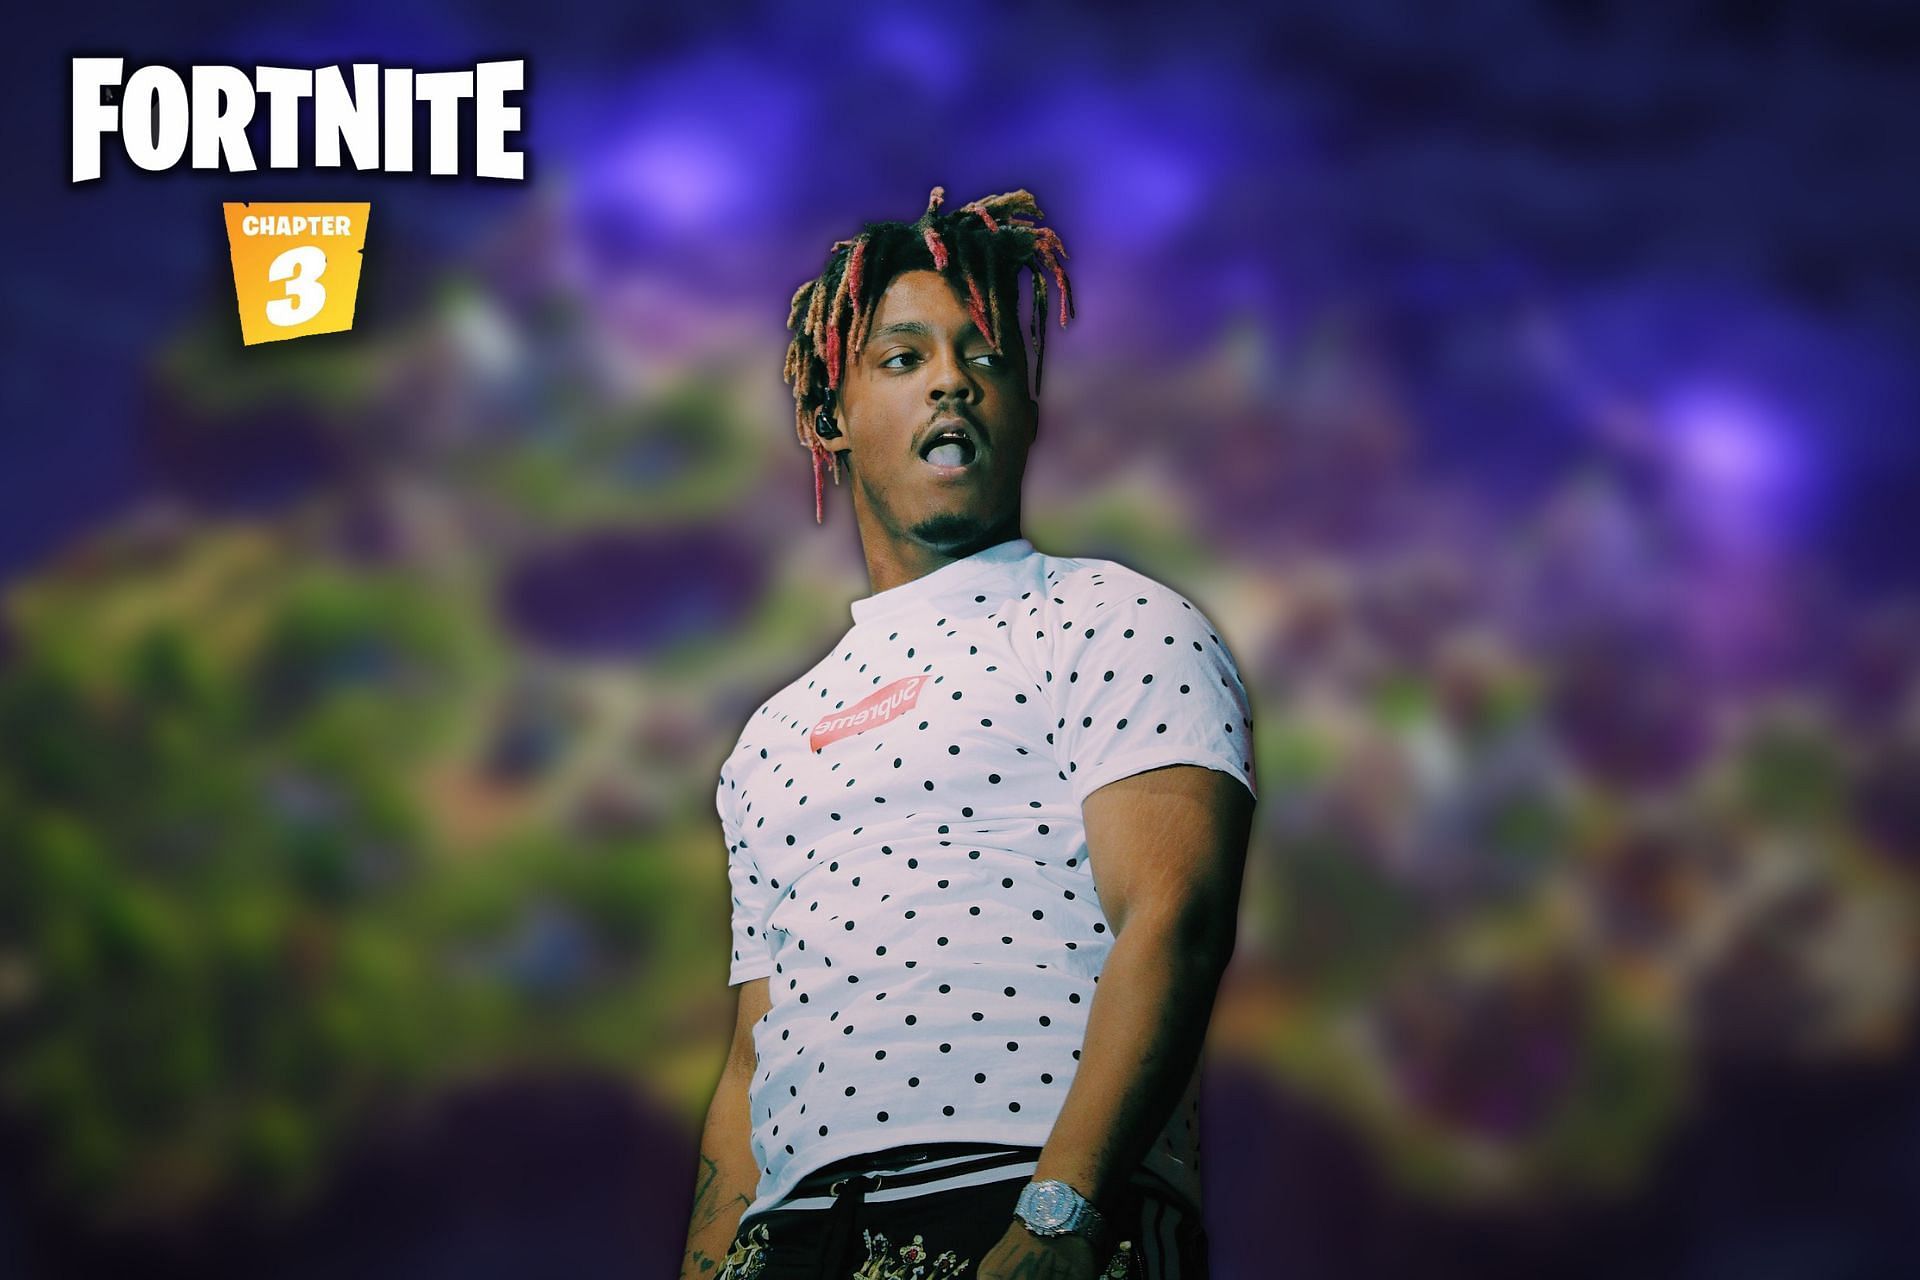 Fortnite could soon immortalize Juice WRLD with their next big move